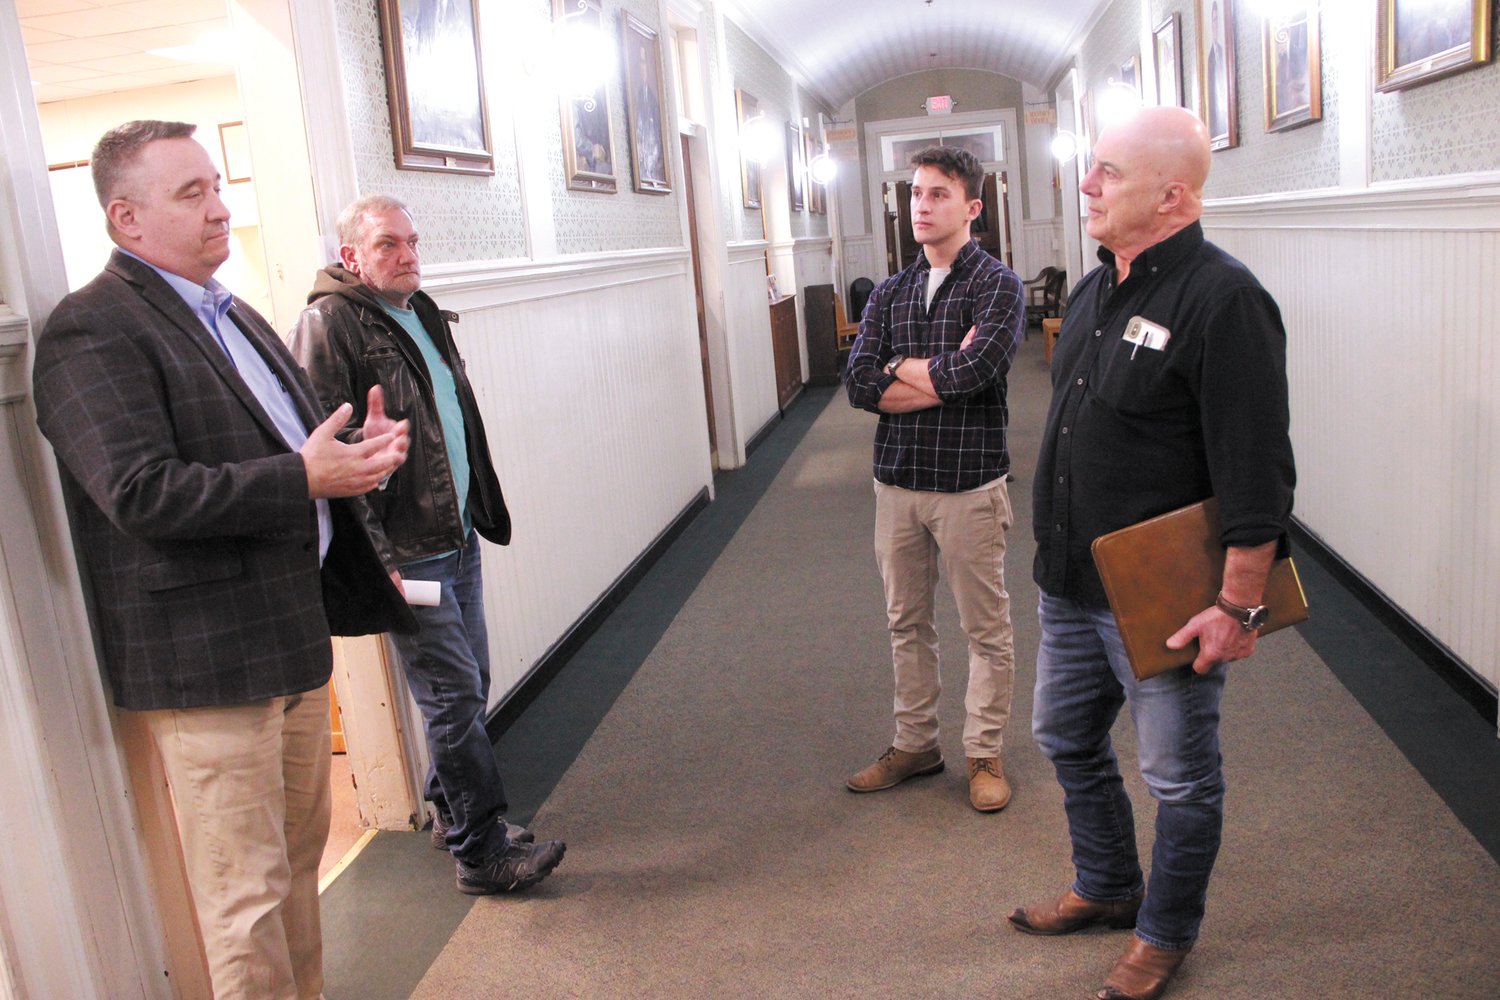 ON THE WAY OUT: Ward 3 Councilman Timothy Howe stopped to chat with members of the Warwick Landlords Association after last Wednesday’s council meeting following first passage of an ordinance regulating short-term rentals. He is talking with Sean Hennessey, who owns an Airbnb in Conimicut, and William Gagnier and his son Van who operate an Airbnb in Pawtuxet. (Warwick Beacon photo)